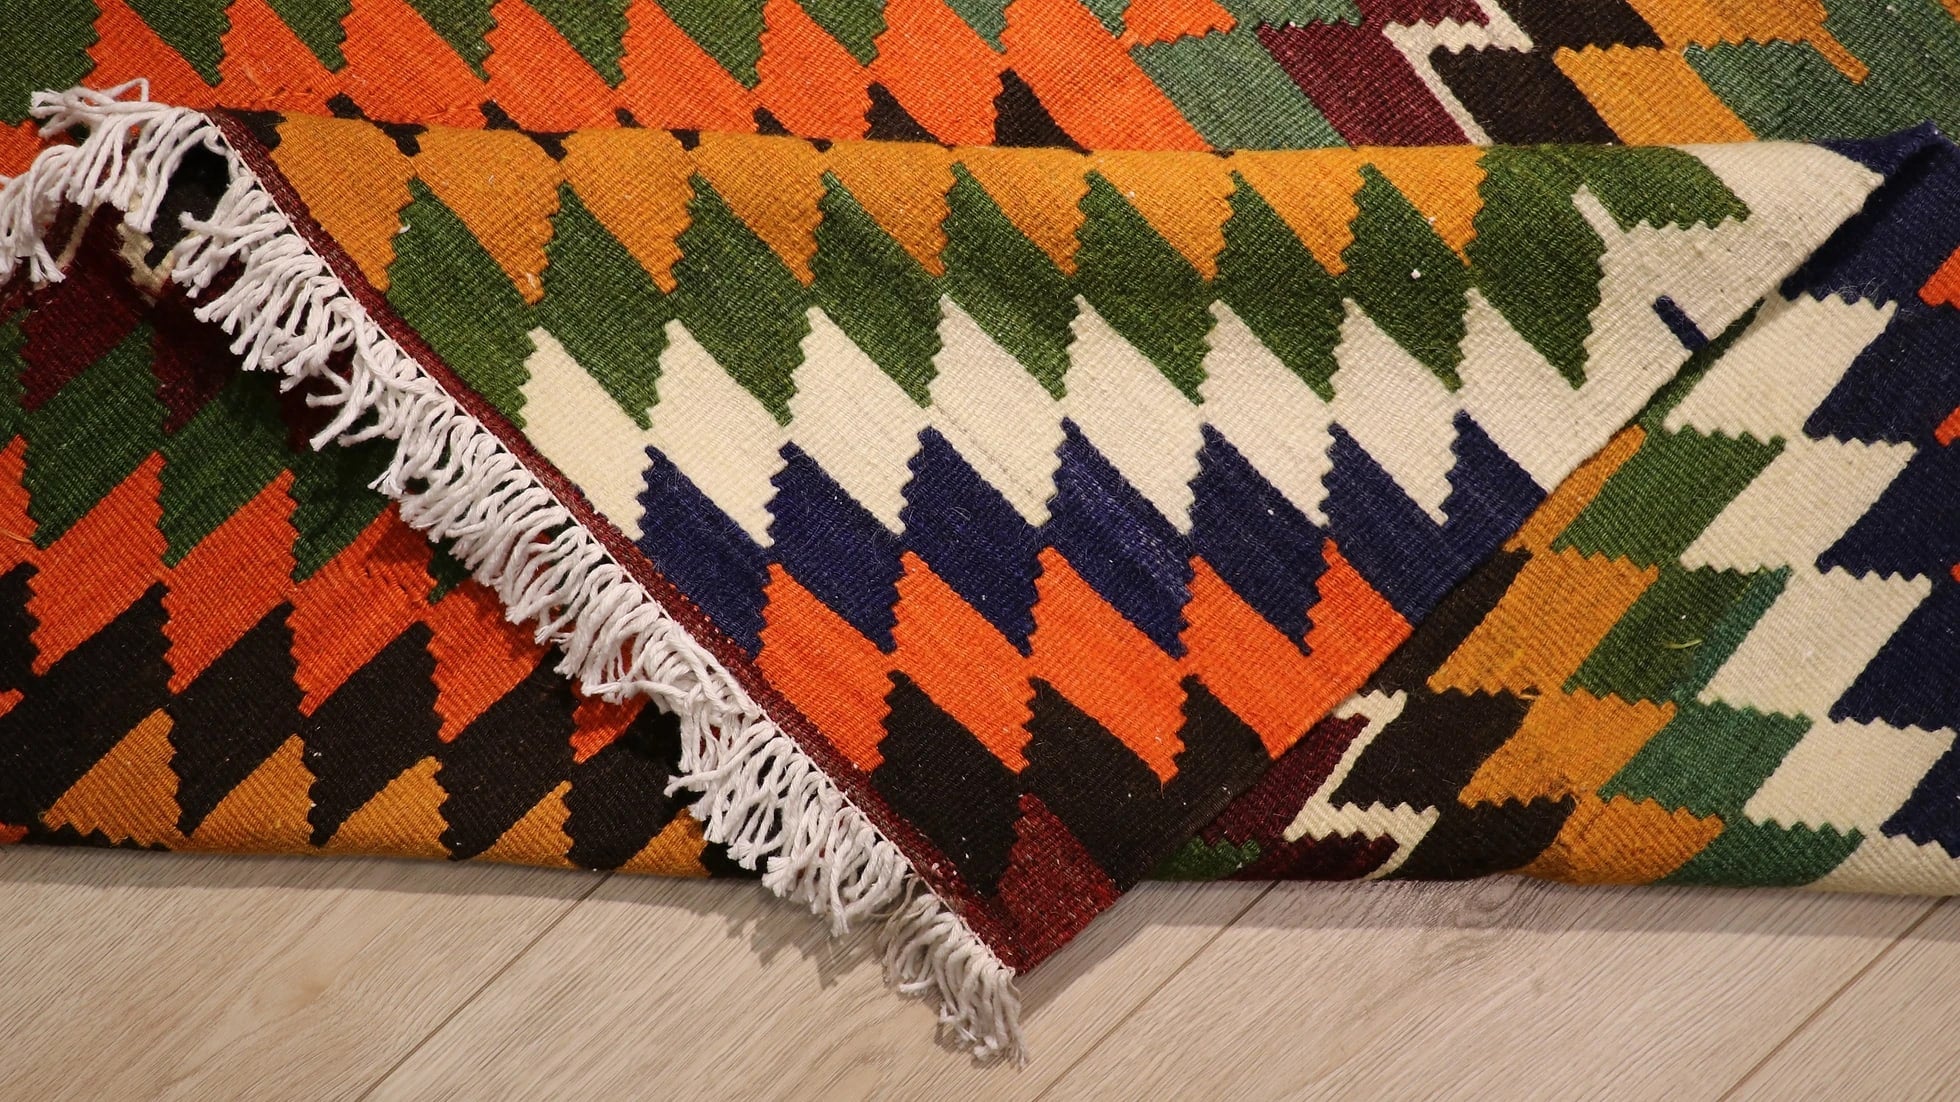 back of the Diamond patterned turkish kilim rug in orange with tassels in detail